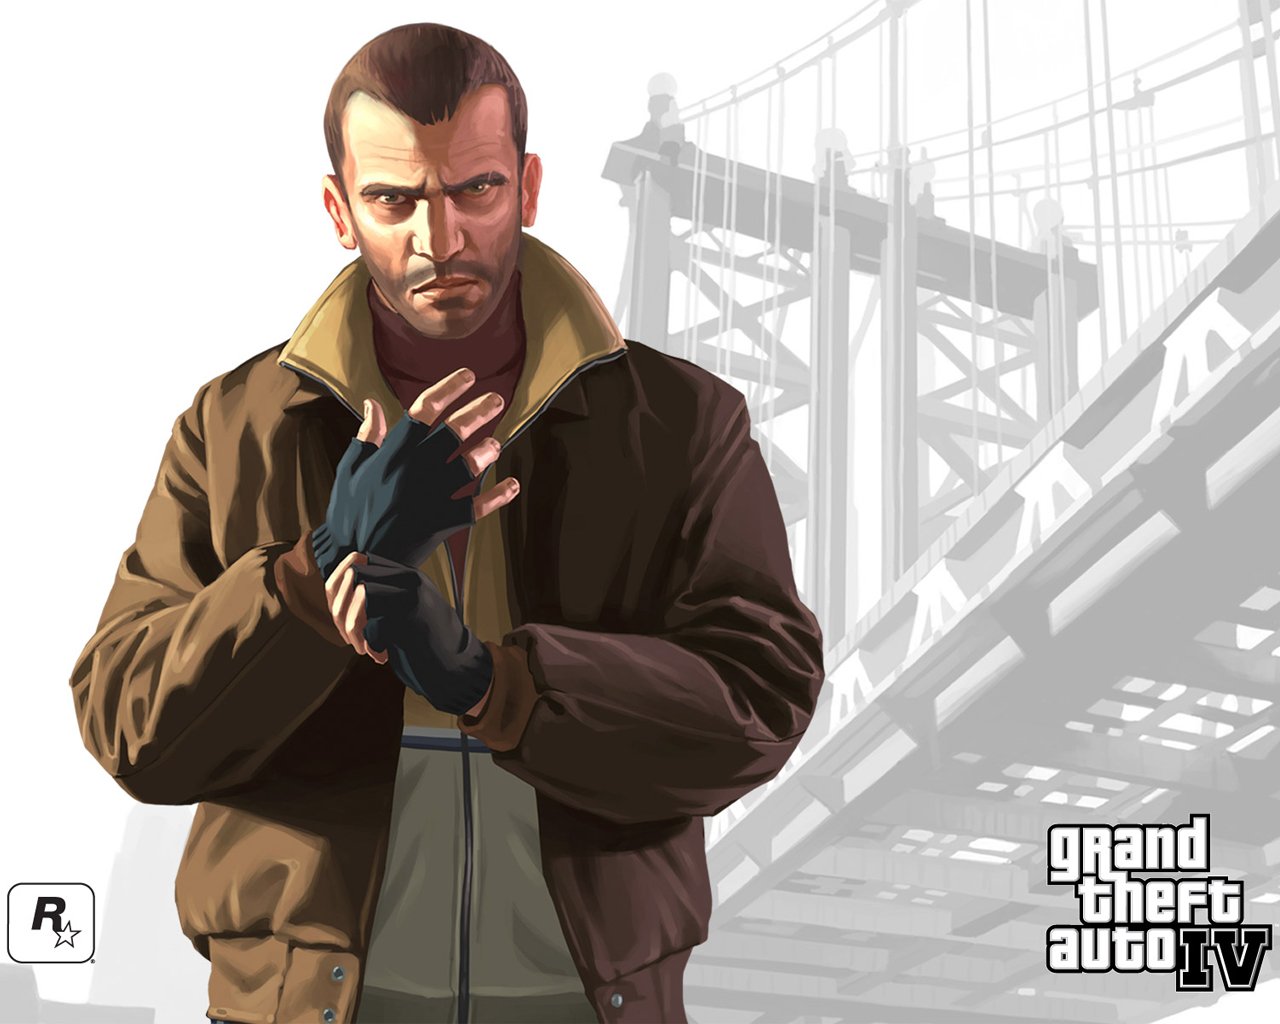 Grand Theft Auto Iv HD Wallpaper Background Image